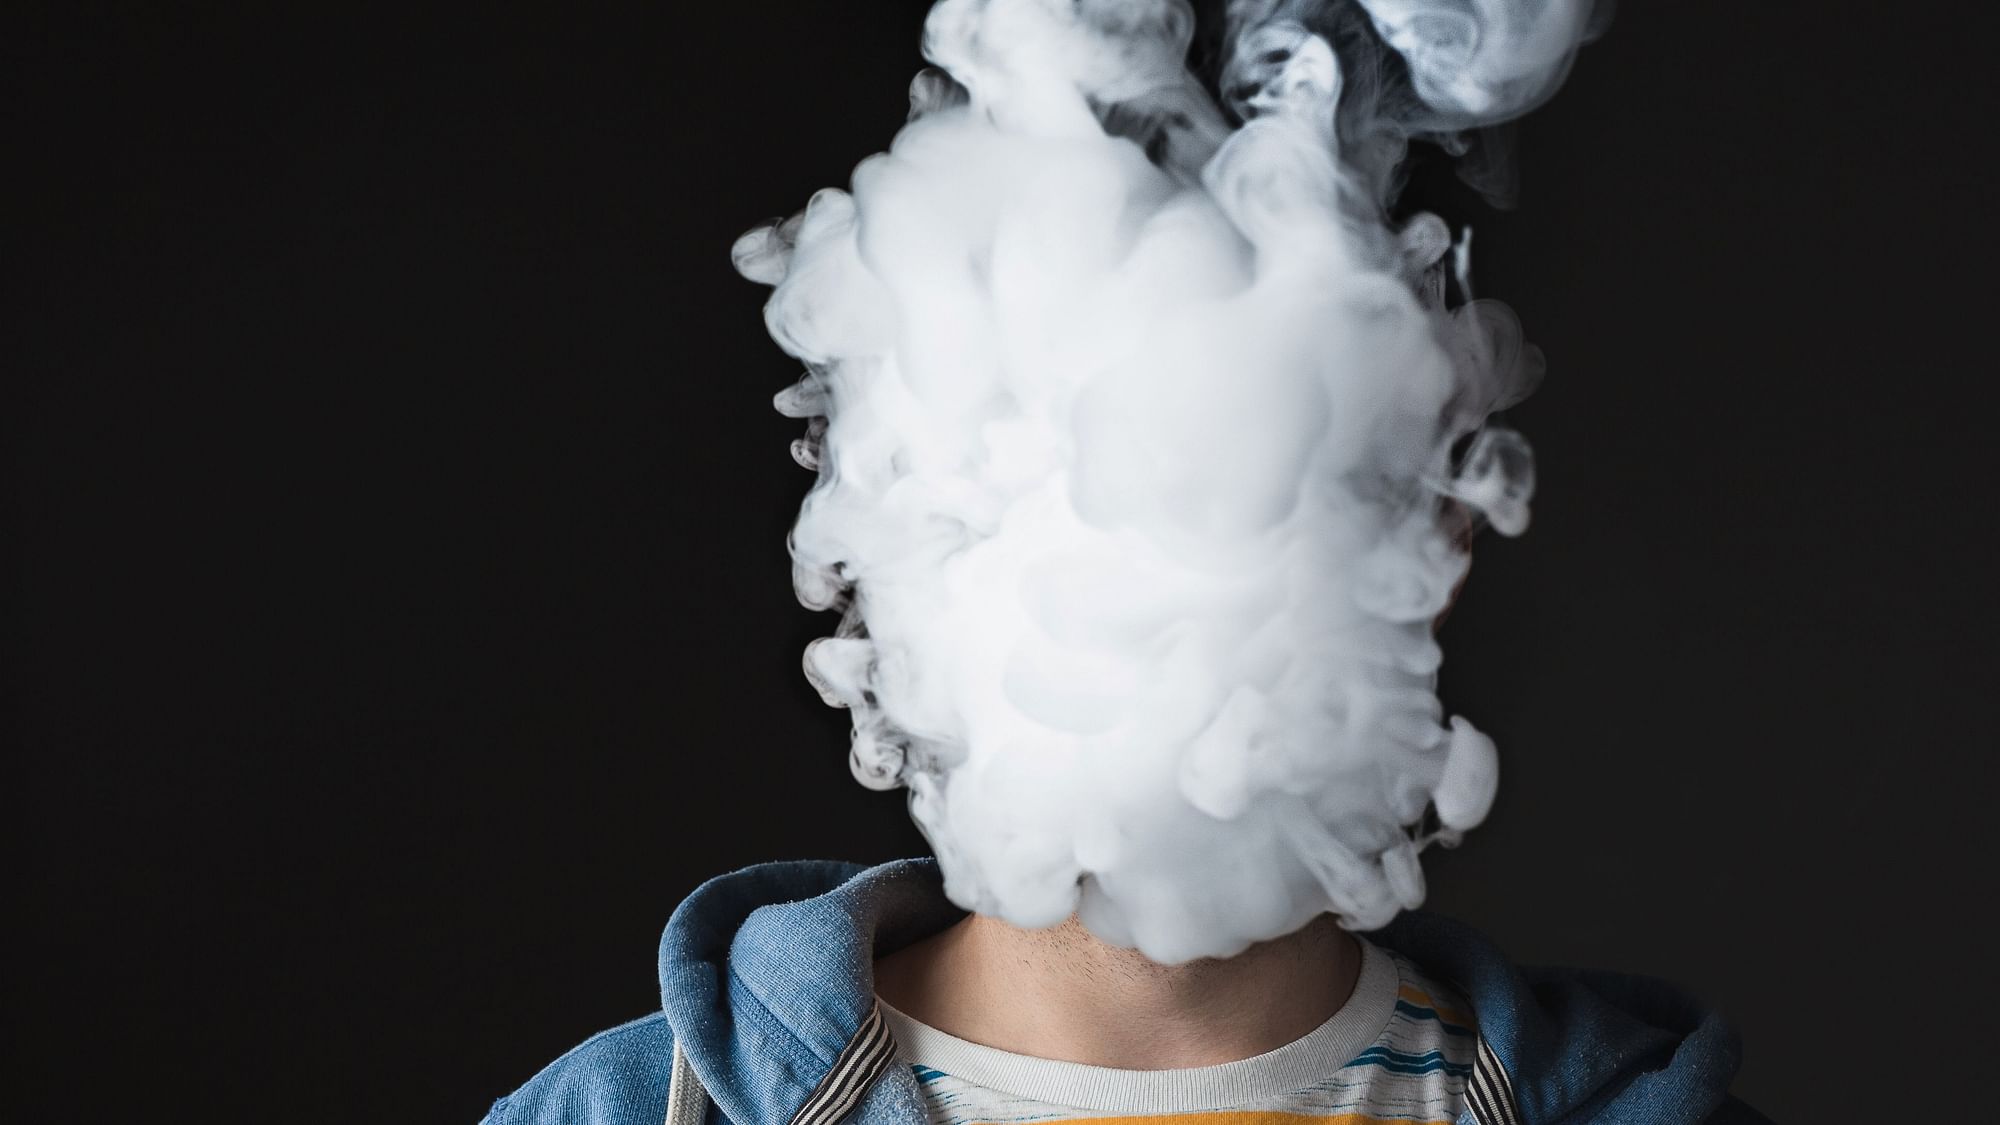 Inhaling heated tobacco vapor through e-cigarettes increases chances of asthma and chronic obstructive pulmonary disease .